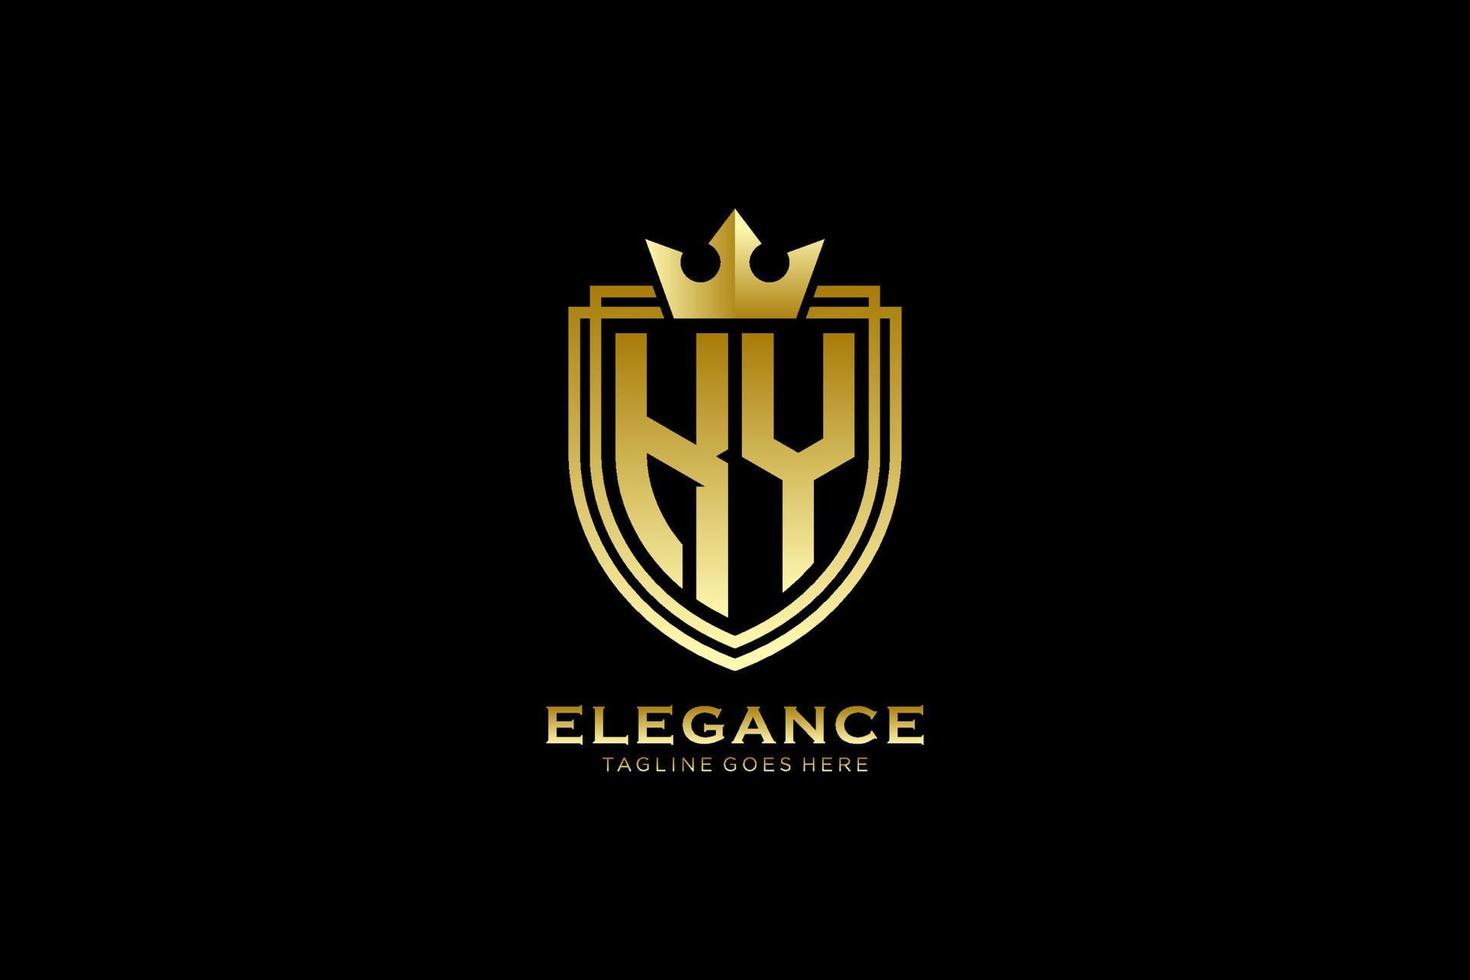 initial KY elegant luxury monogram logo or badge template with scrolls and royal crown - perfect for luxurious branding projects vector